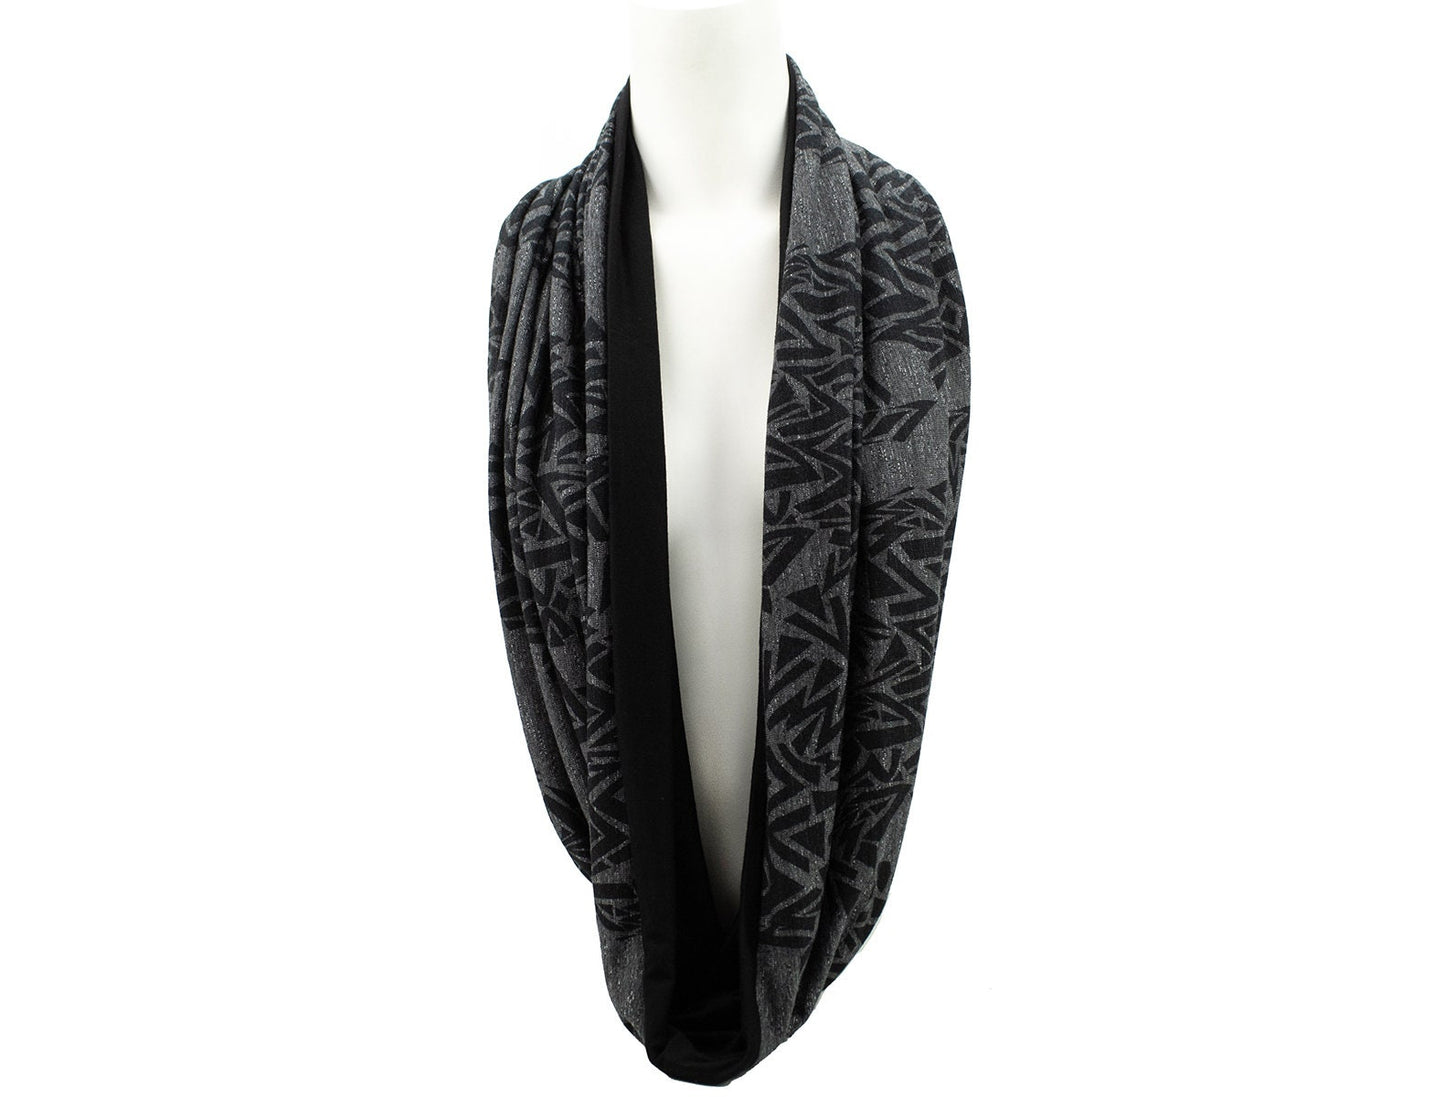 Gray and Black Tribal Knit Infinity Scarf